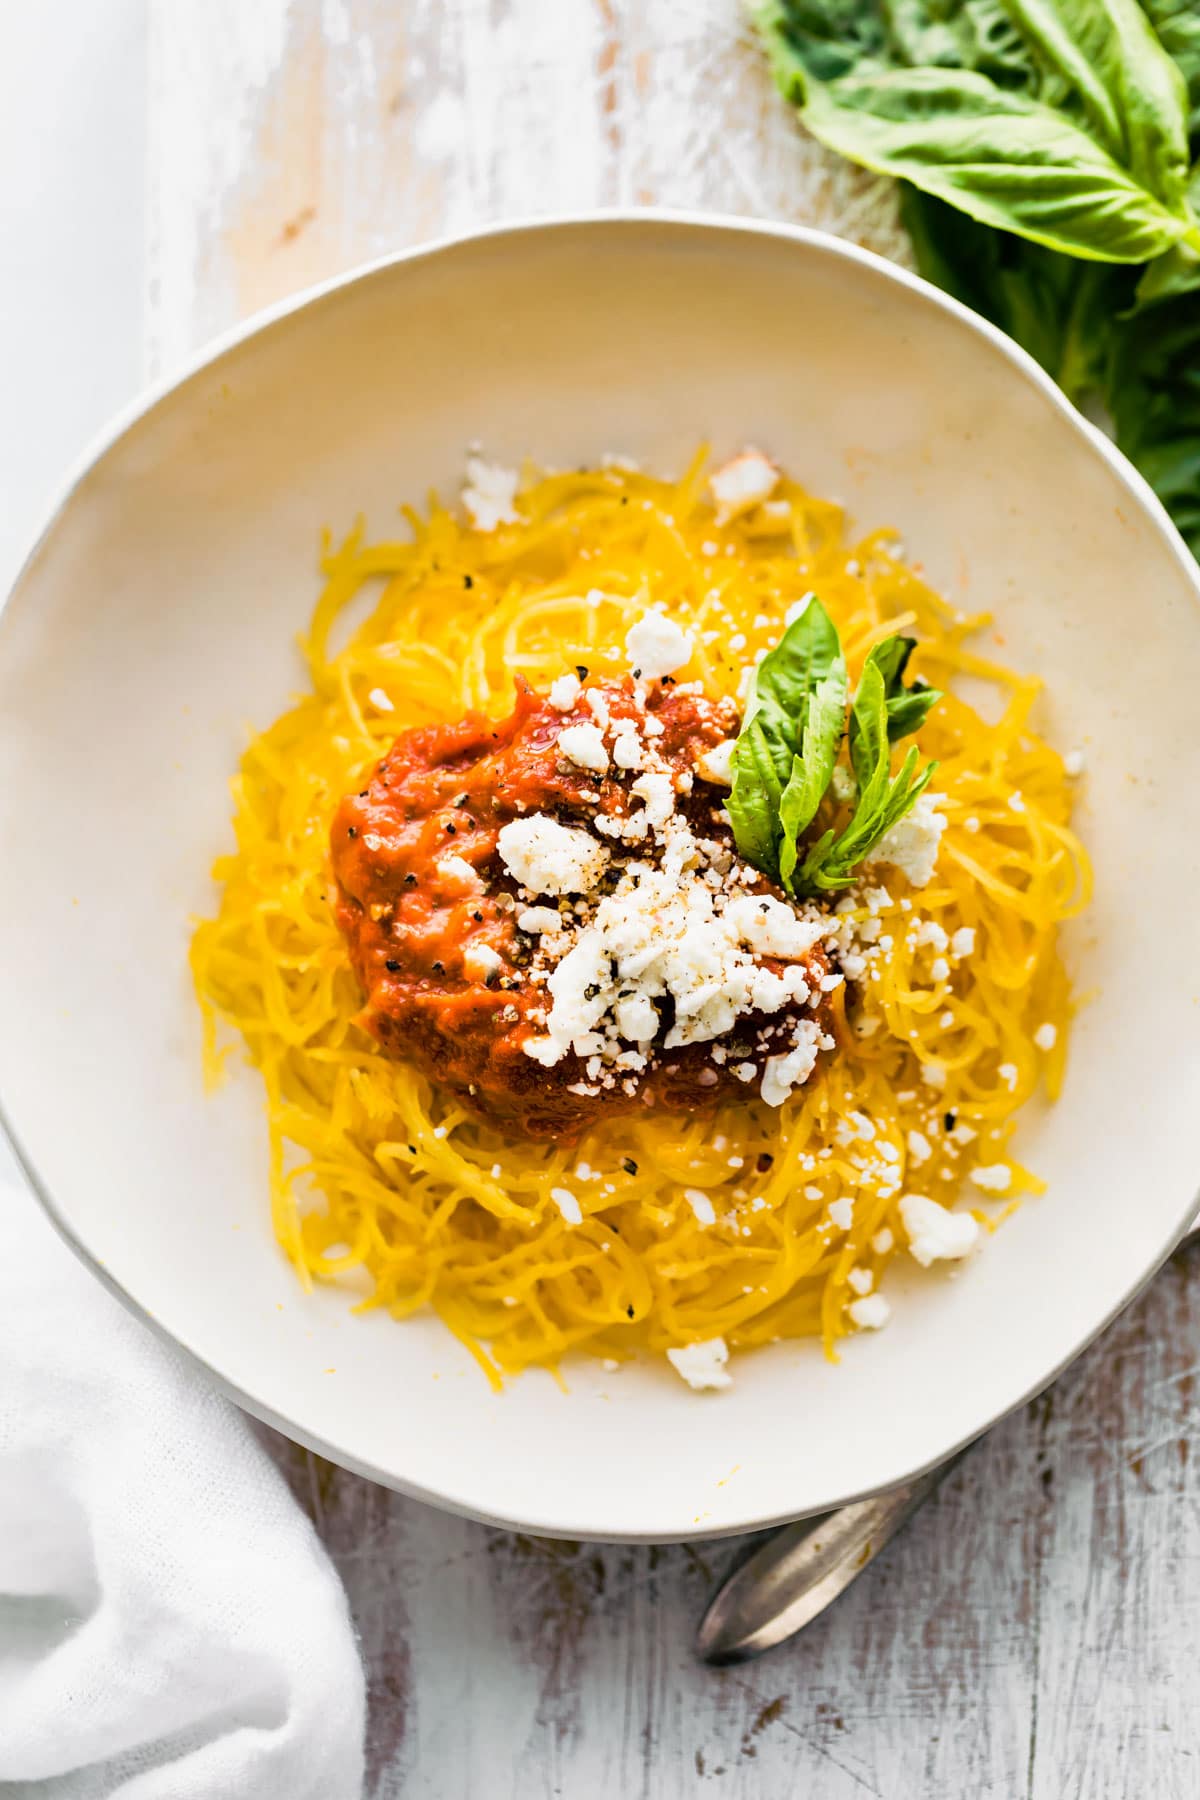 plate of Instant Pot spaghetti squash pasta with nomato sauce and dairy free Parmesan cheese